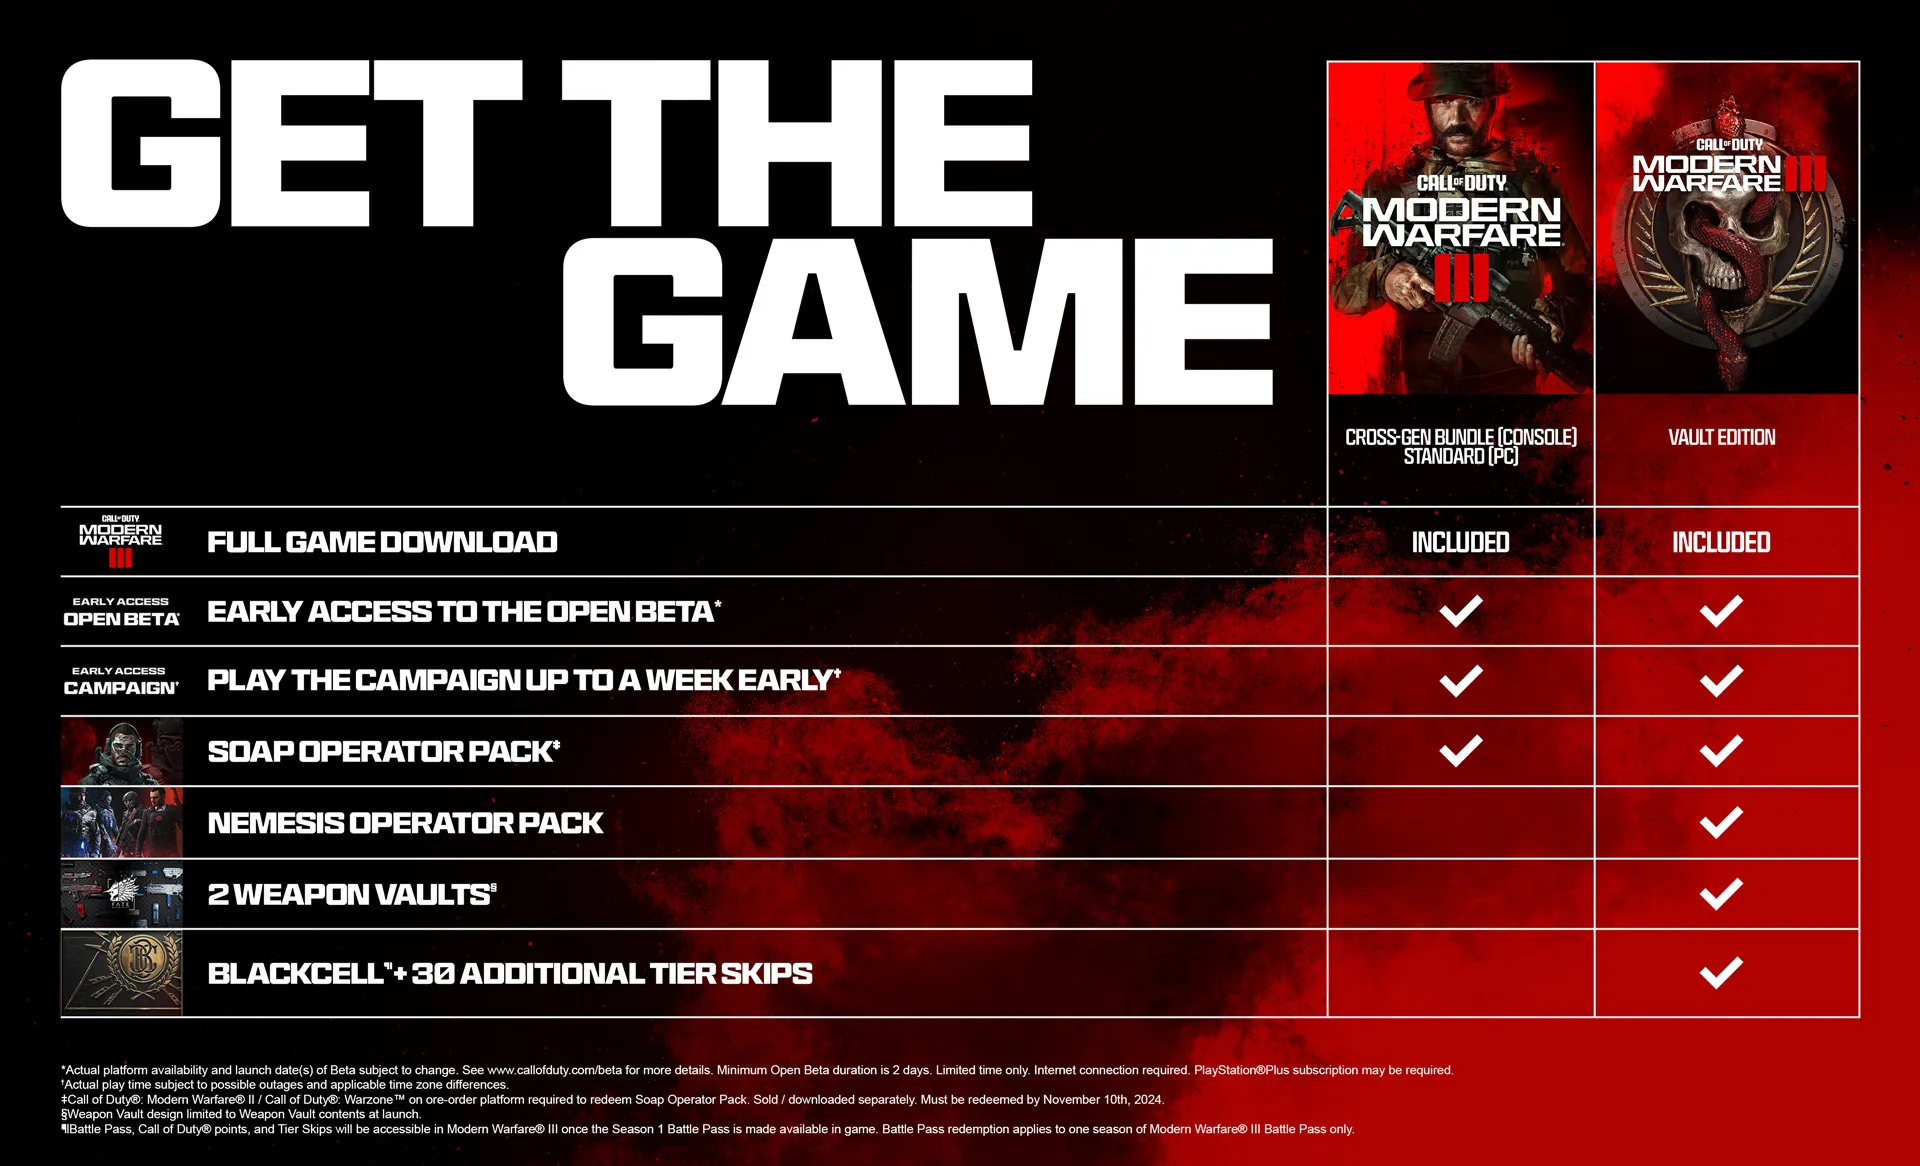 How To Play Call of Duty: Modern Warfare 2 Campaign Early